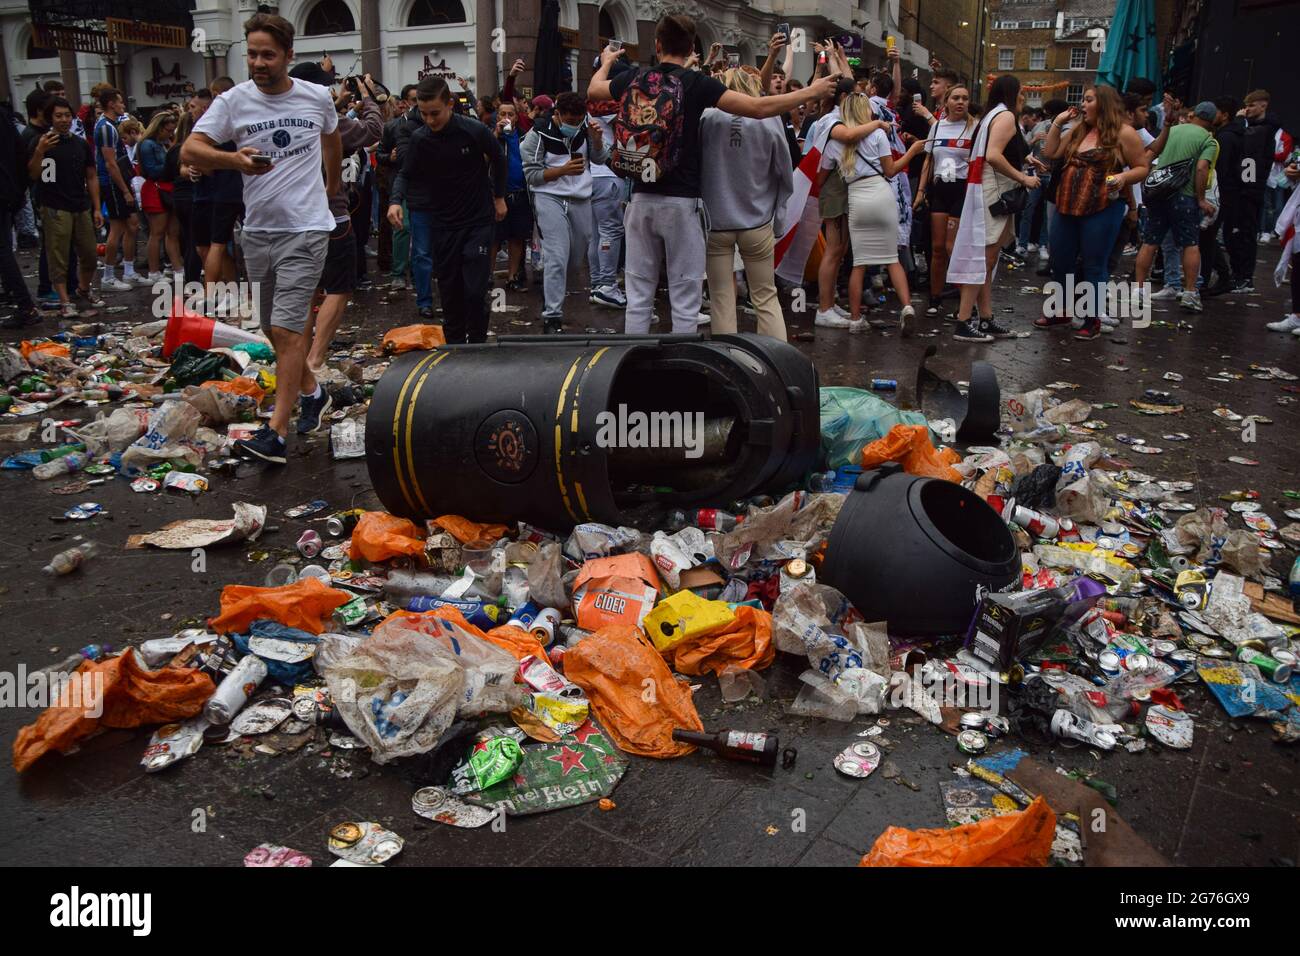 London, United Kingdom. 11th July 2021. England supporters destroy garbage bins and leave huge amounts of trash in Leicester Square ahead of the England v Italy Euro 2020 final. (Credit: Vuk Valcic / Alamy Live News) Stock Photo